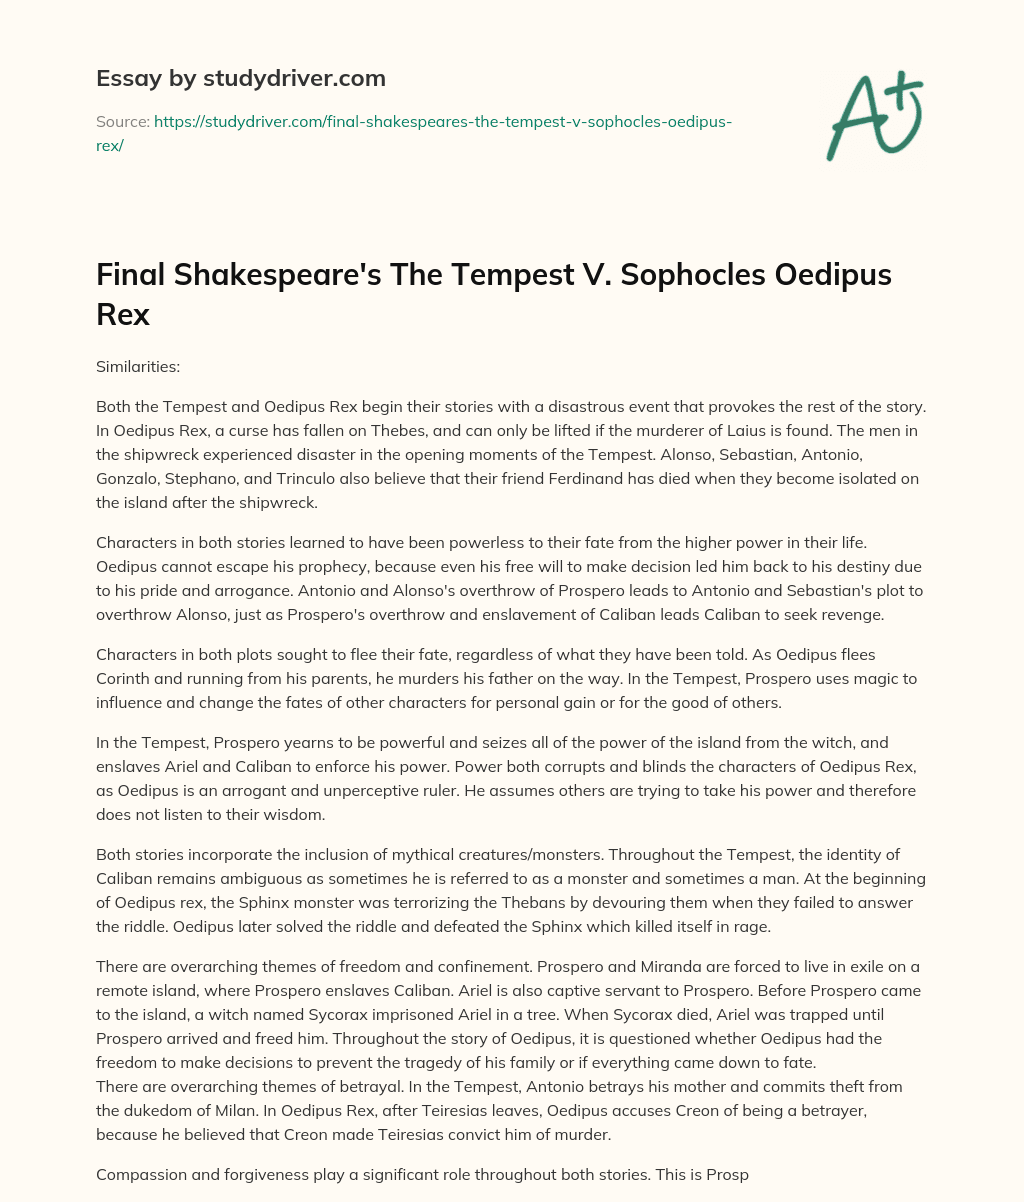 Final Shakespeare’s the Tempest V. Sophocles Oedipus Rex essay